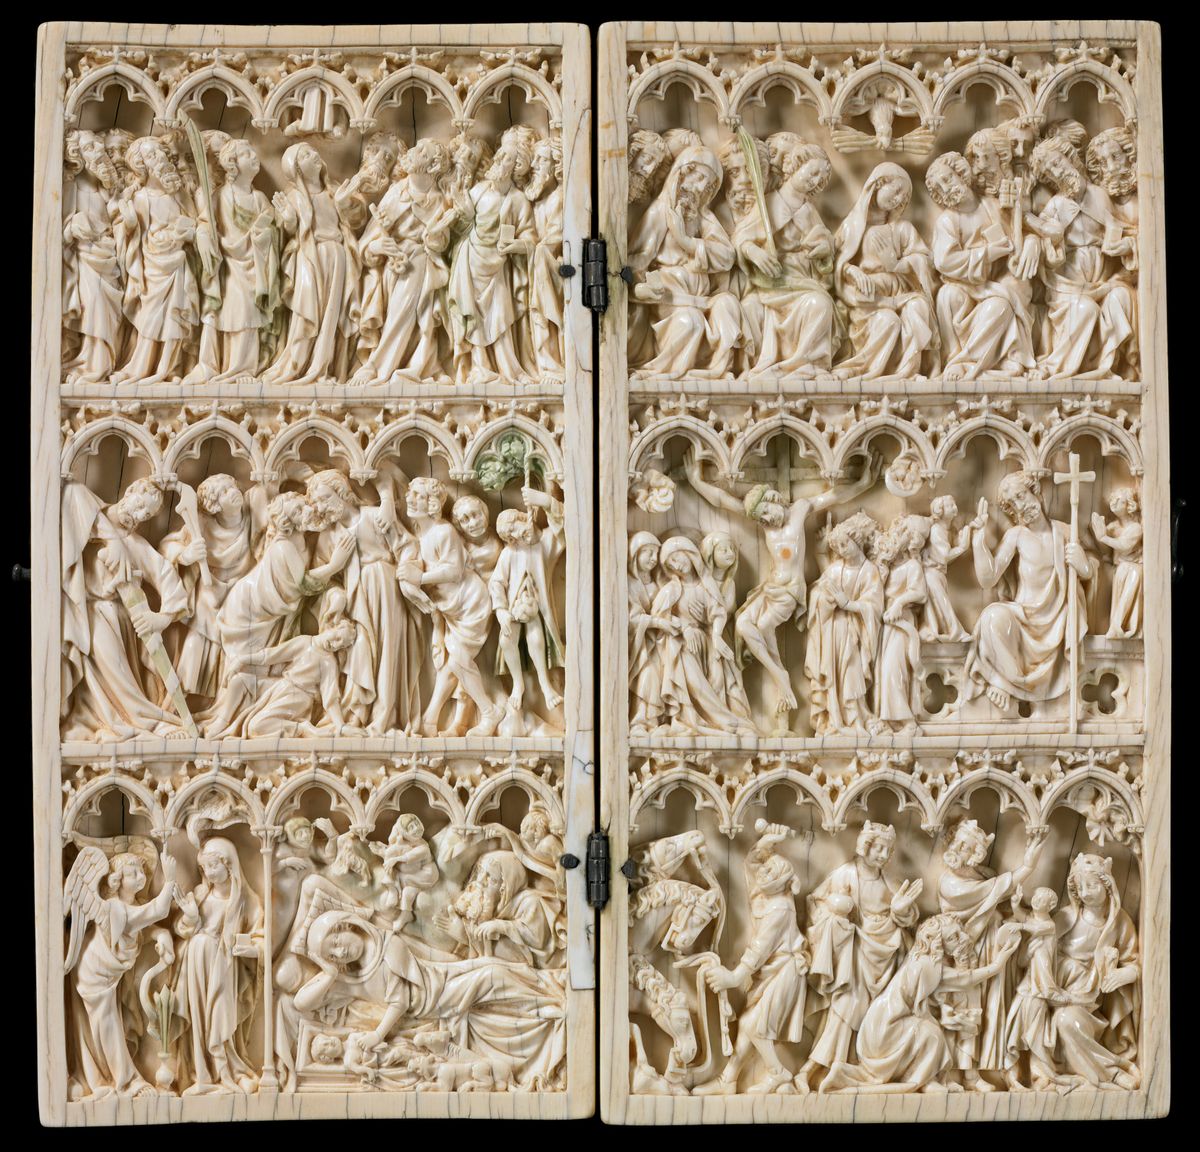 Diptych with scenes from the life of Christ (1375) Attributed to Master of the Passion Diptych - Catholic Stock Photo